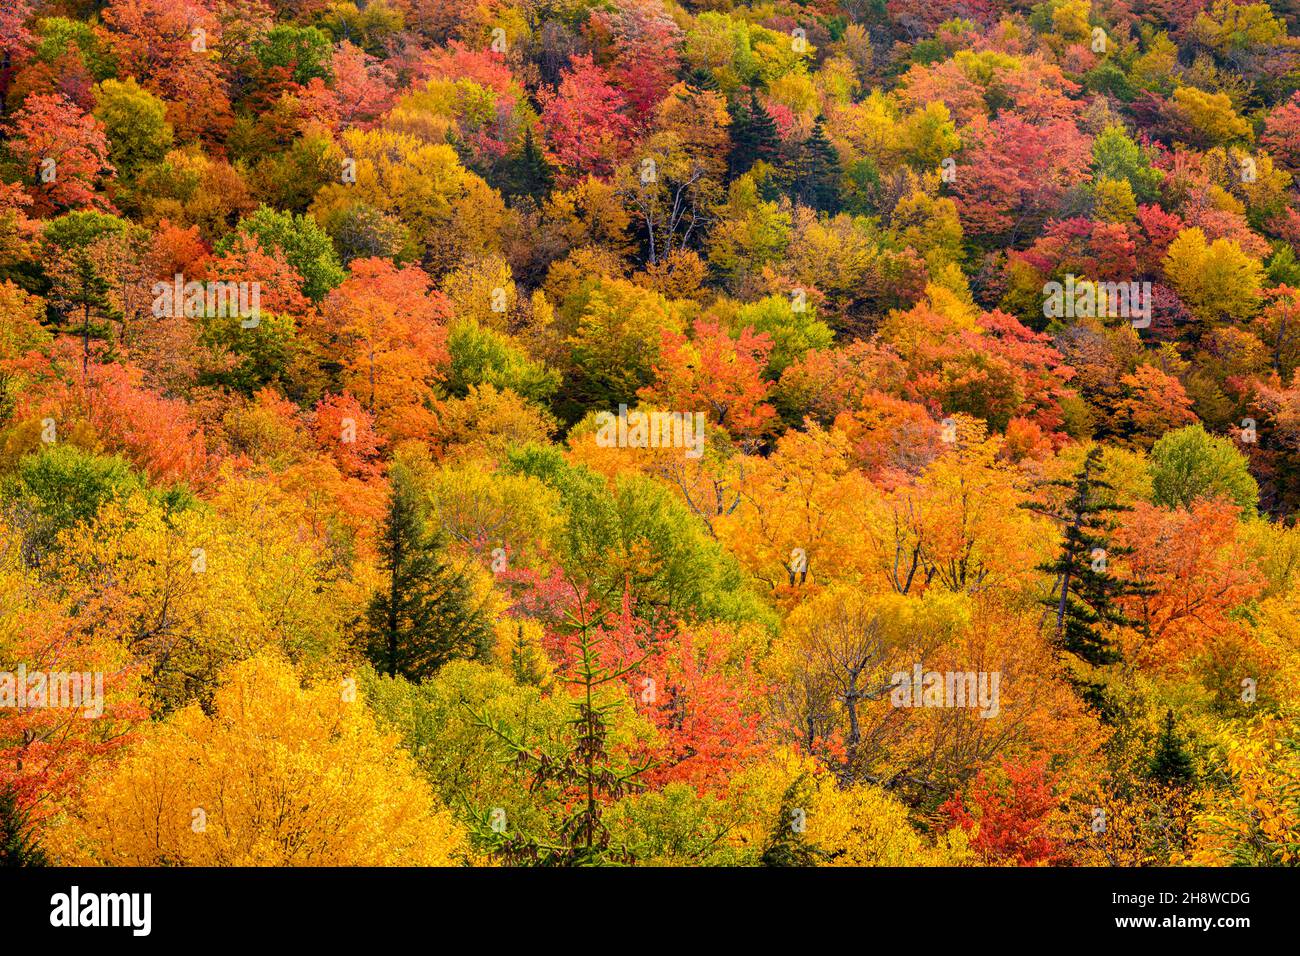 Autumn foliage in the deciduous forest on New England hillsides, Highway 16 near Pinkham Notch, New Hampshire, USA Stock Photo